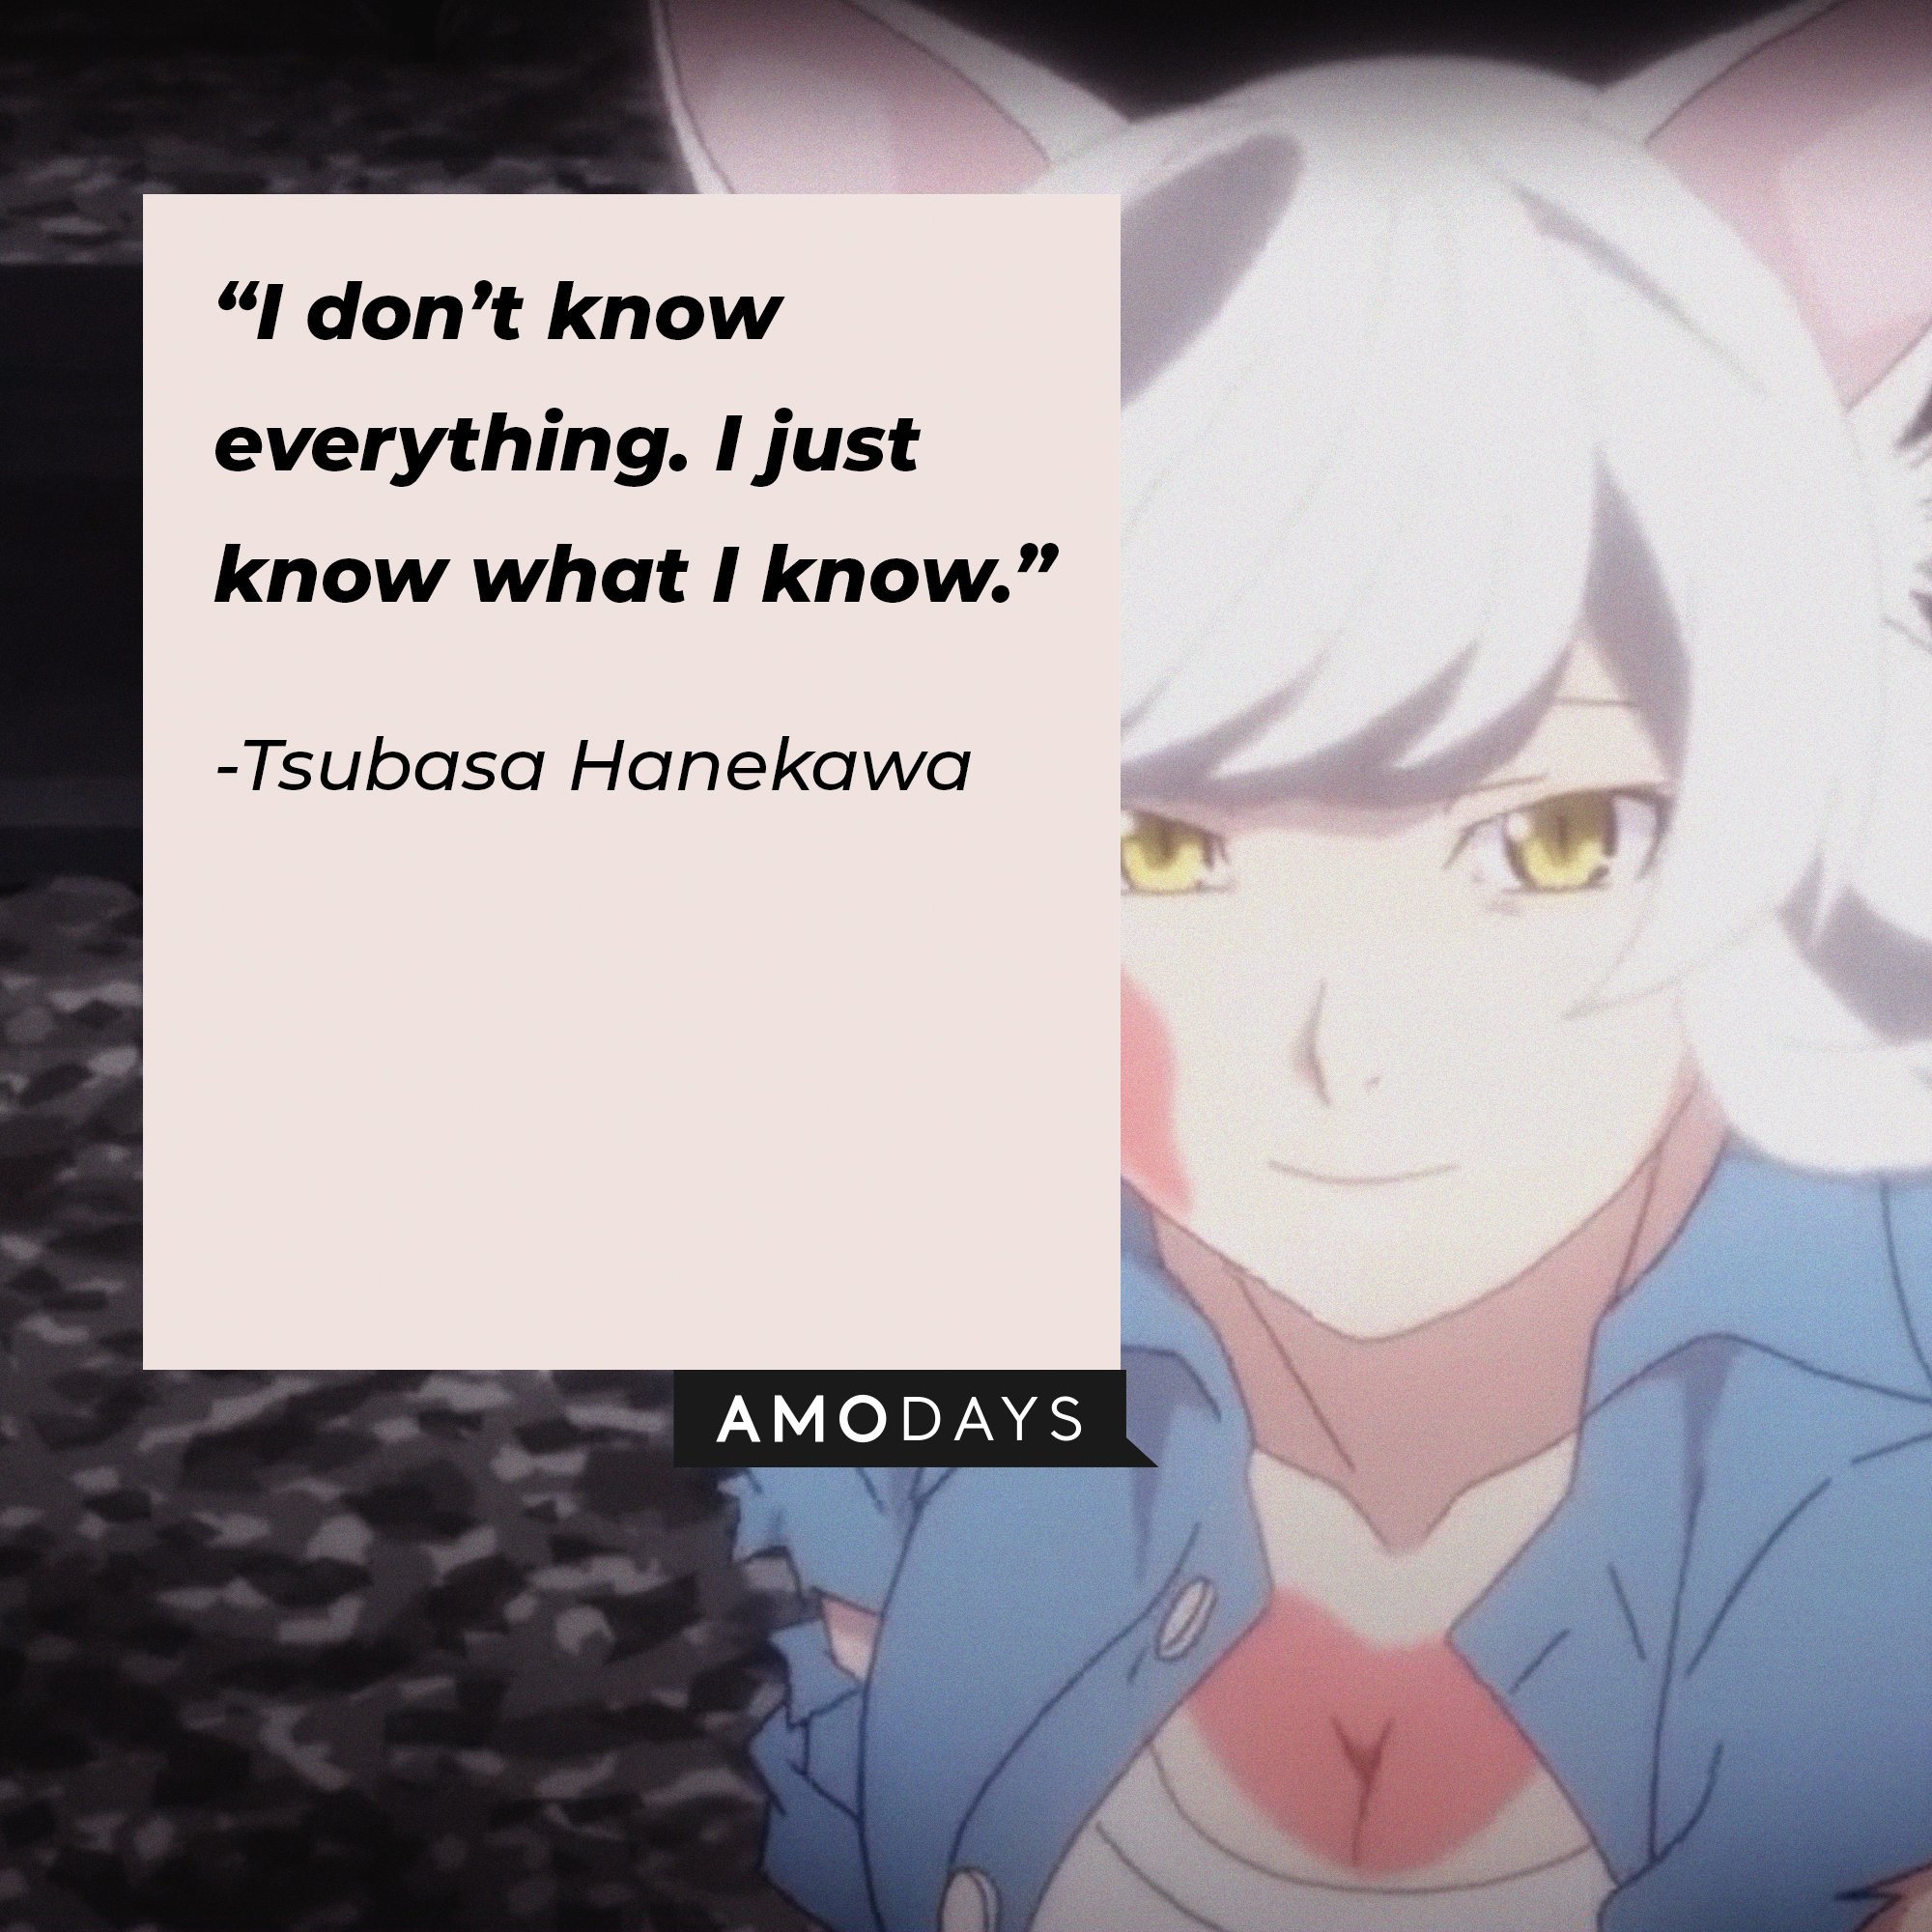 Tsubasa Hanekawa’s quote: "I don't know everything. I just know what I know." | Image: AmoDays